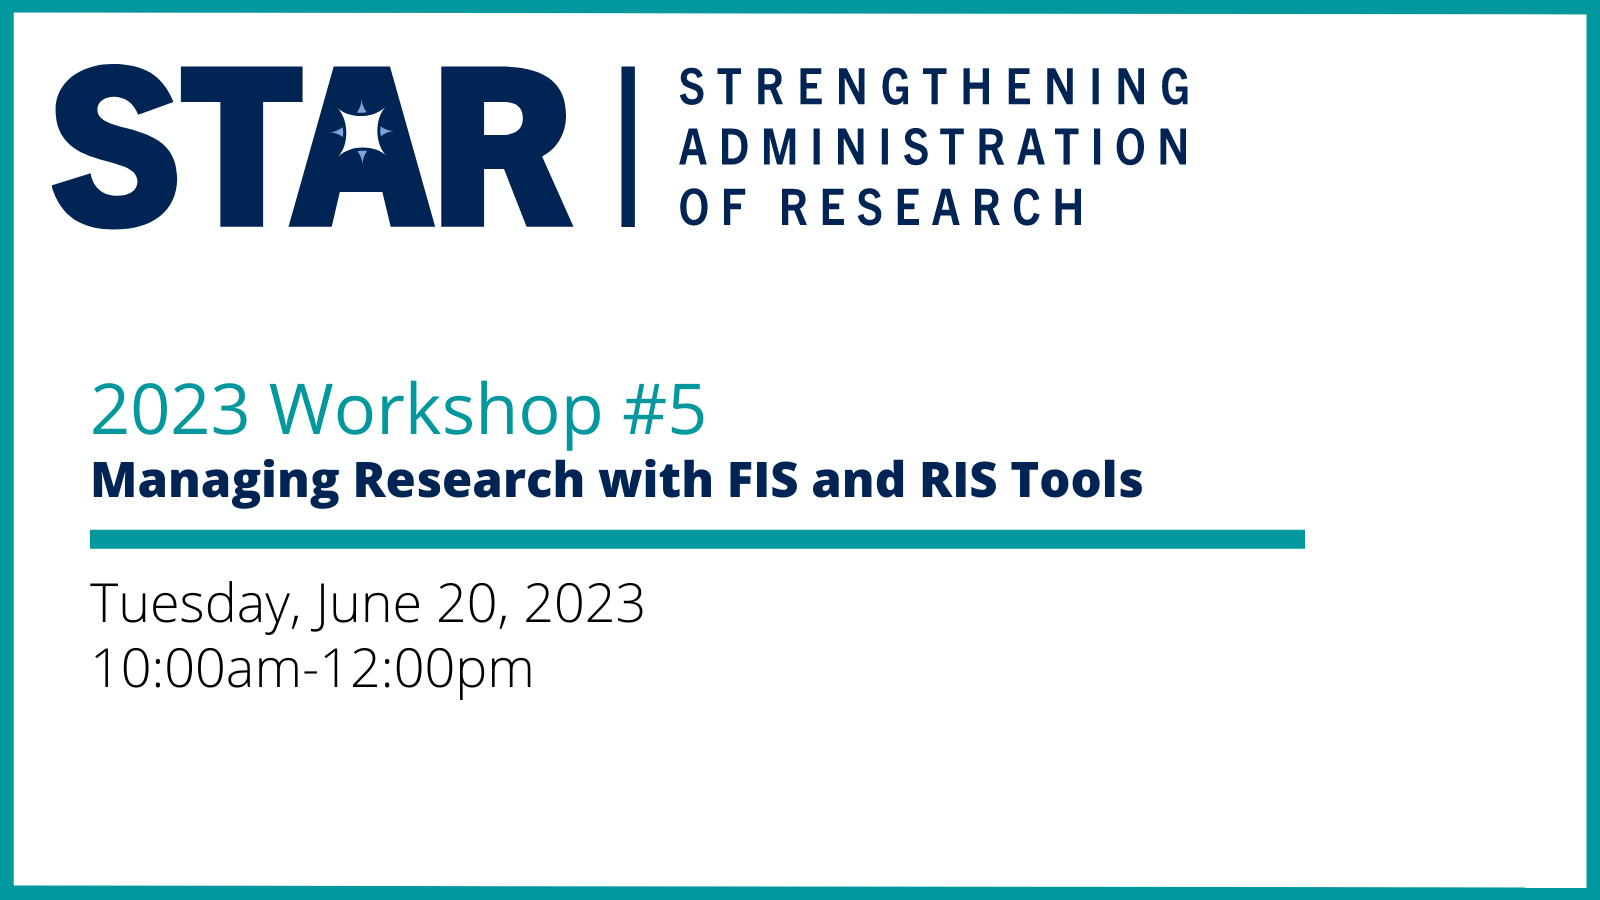 This image is a poster for this session with the title, date, and wordmark for the STAR, Strengthening Administration of Research.